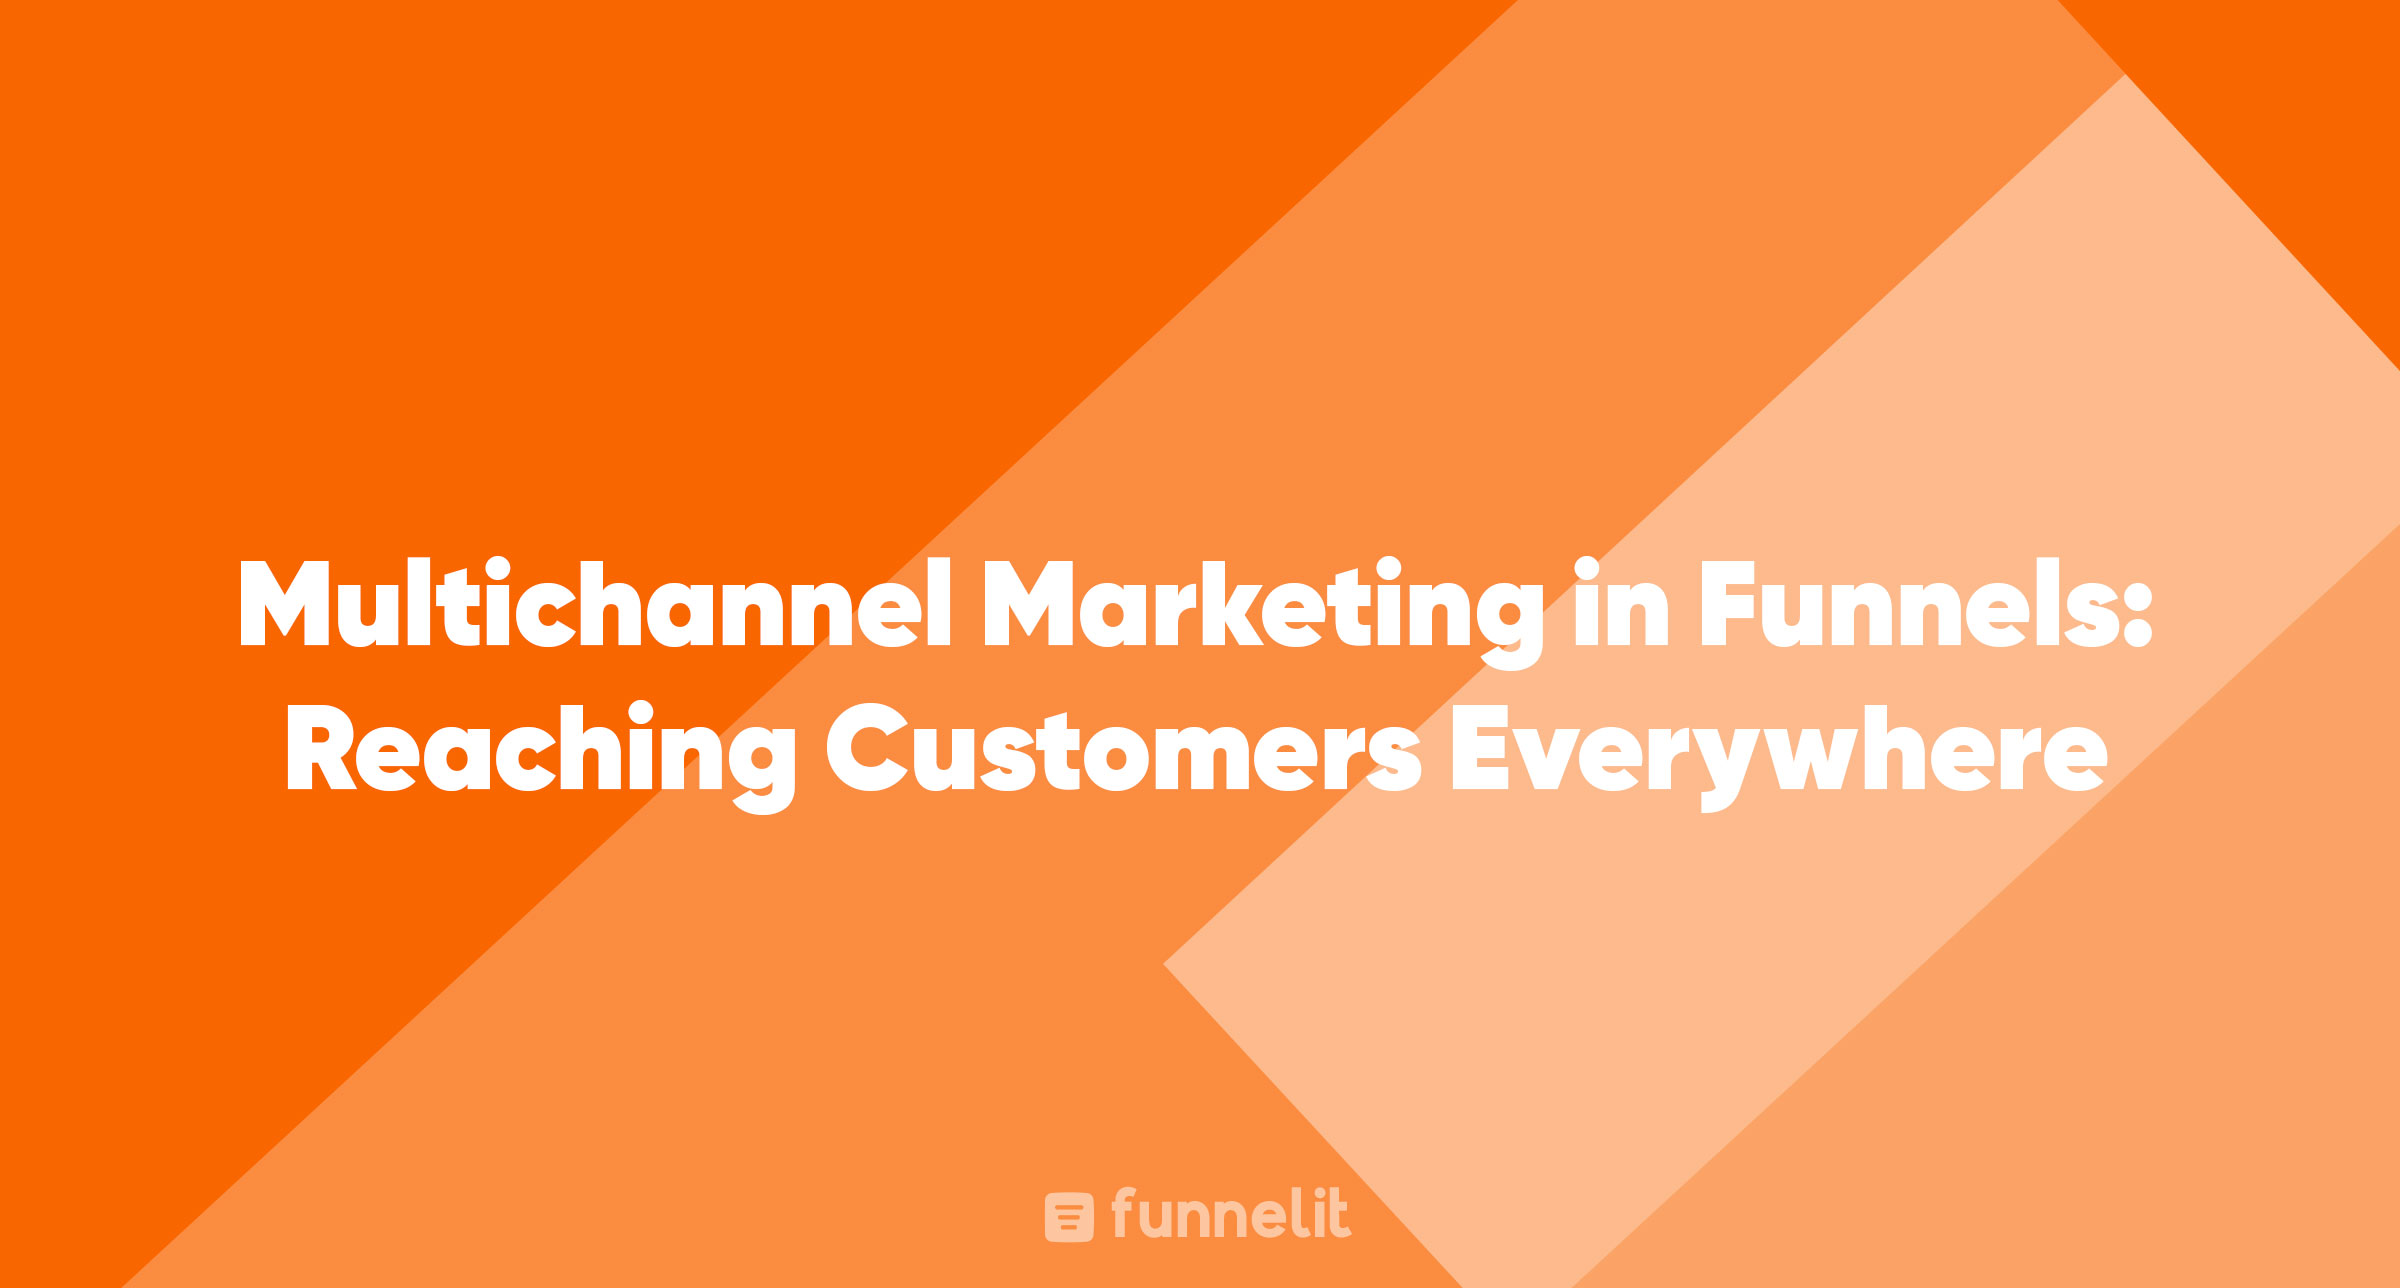 Article | Multichannel Marketing in Funnels: Reaching Customers Everywhere